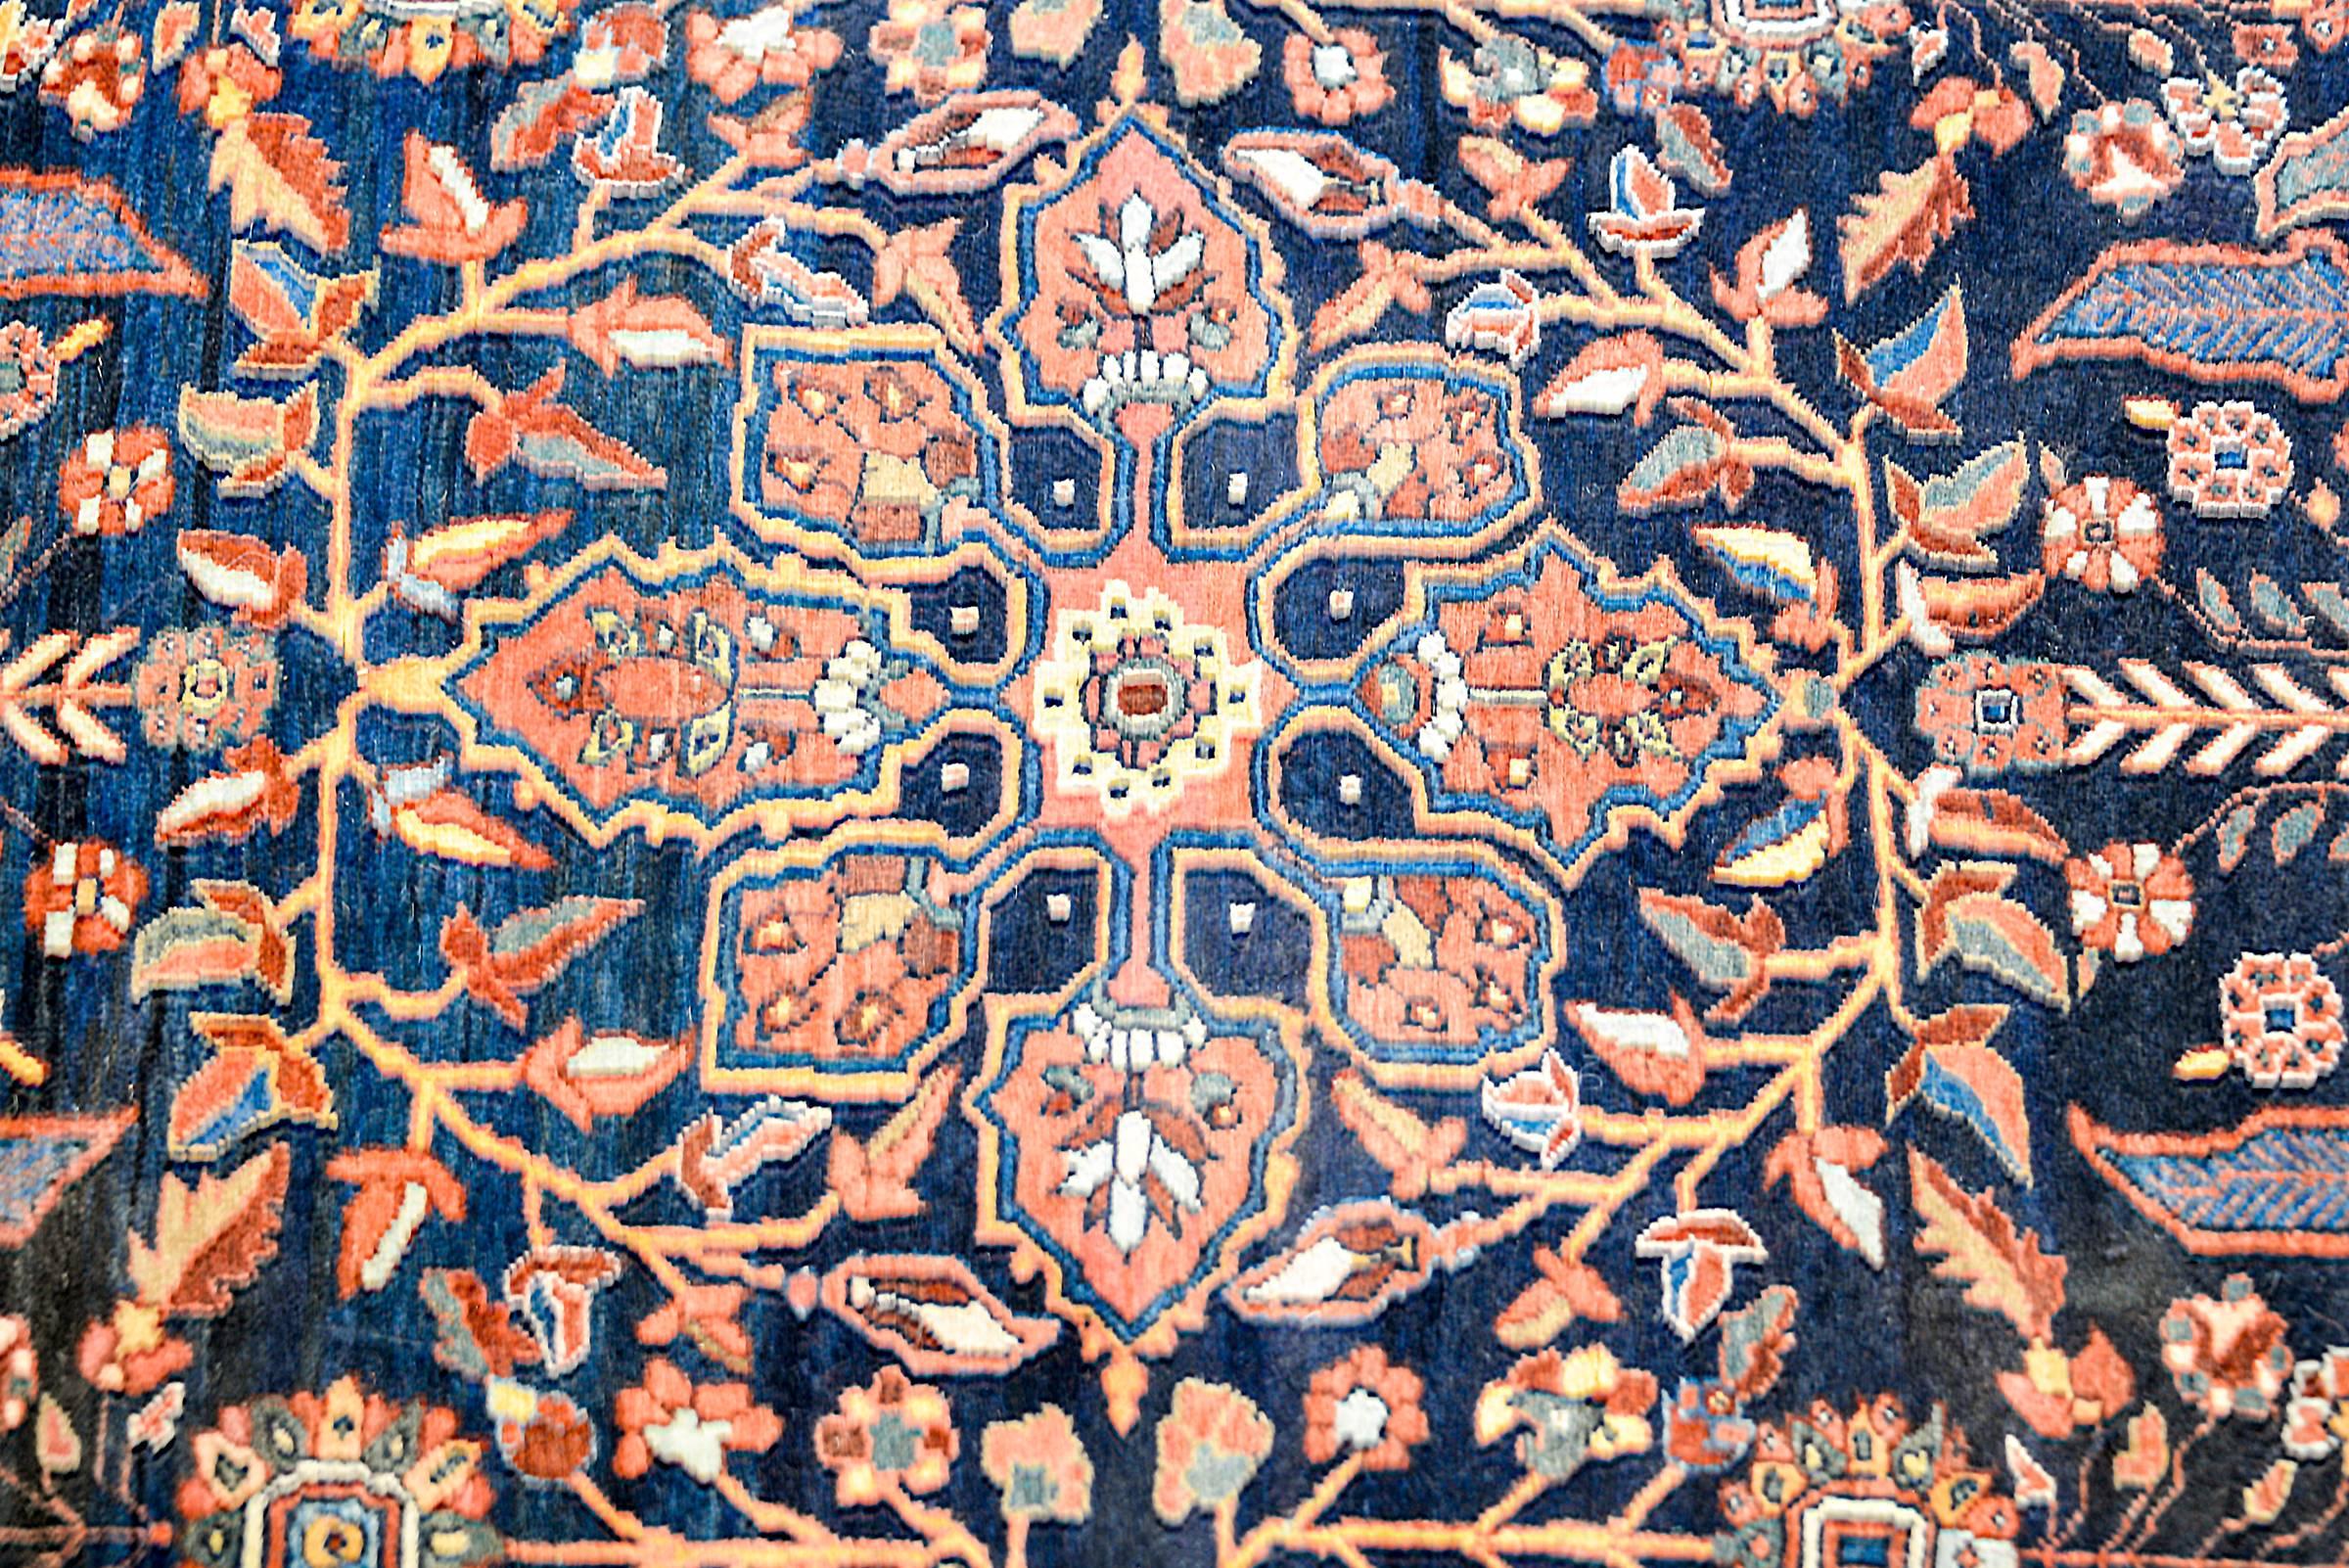 An amazing early 20th century Persian Sarouk rug with a fantastic large central lobed coral and floral medallion amidst an indigo field of flowering branches and mirrored trees-of-life at each end. The border is beautiful with a wide central